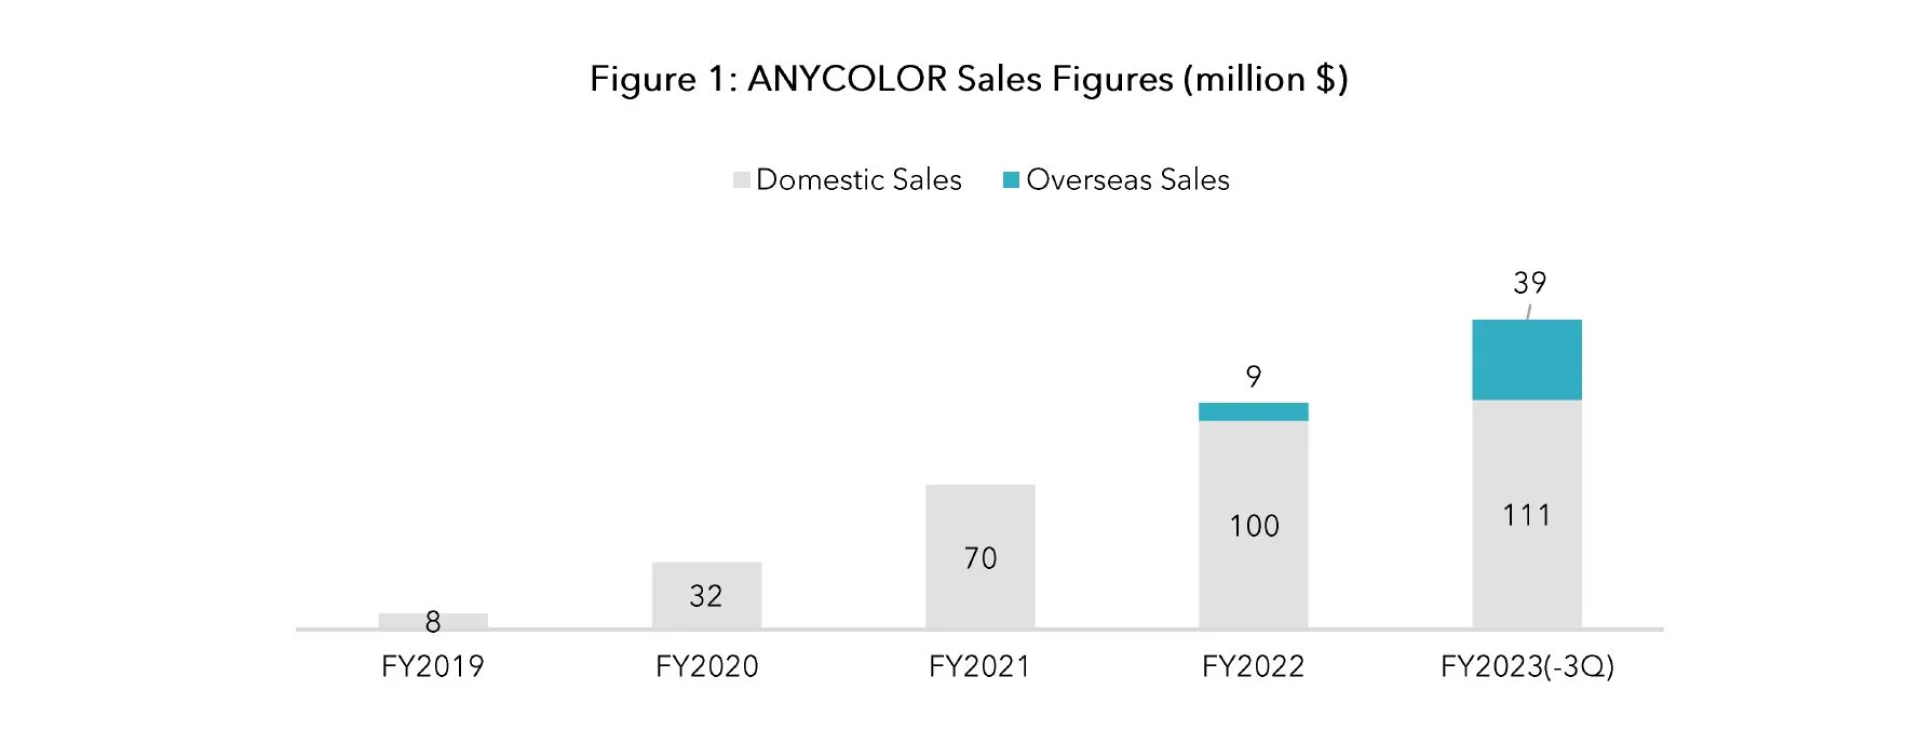 Figure 1 ANYCOLOR Sales Figures